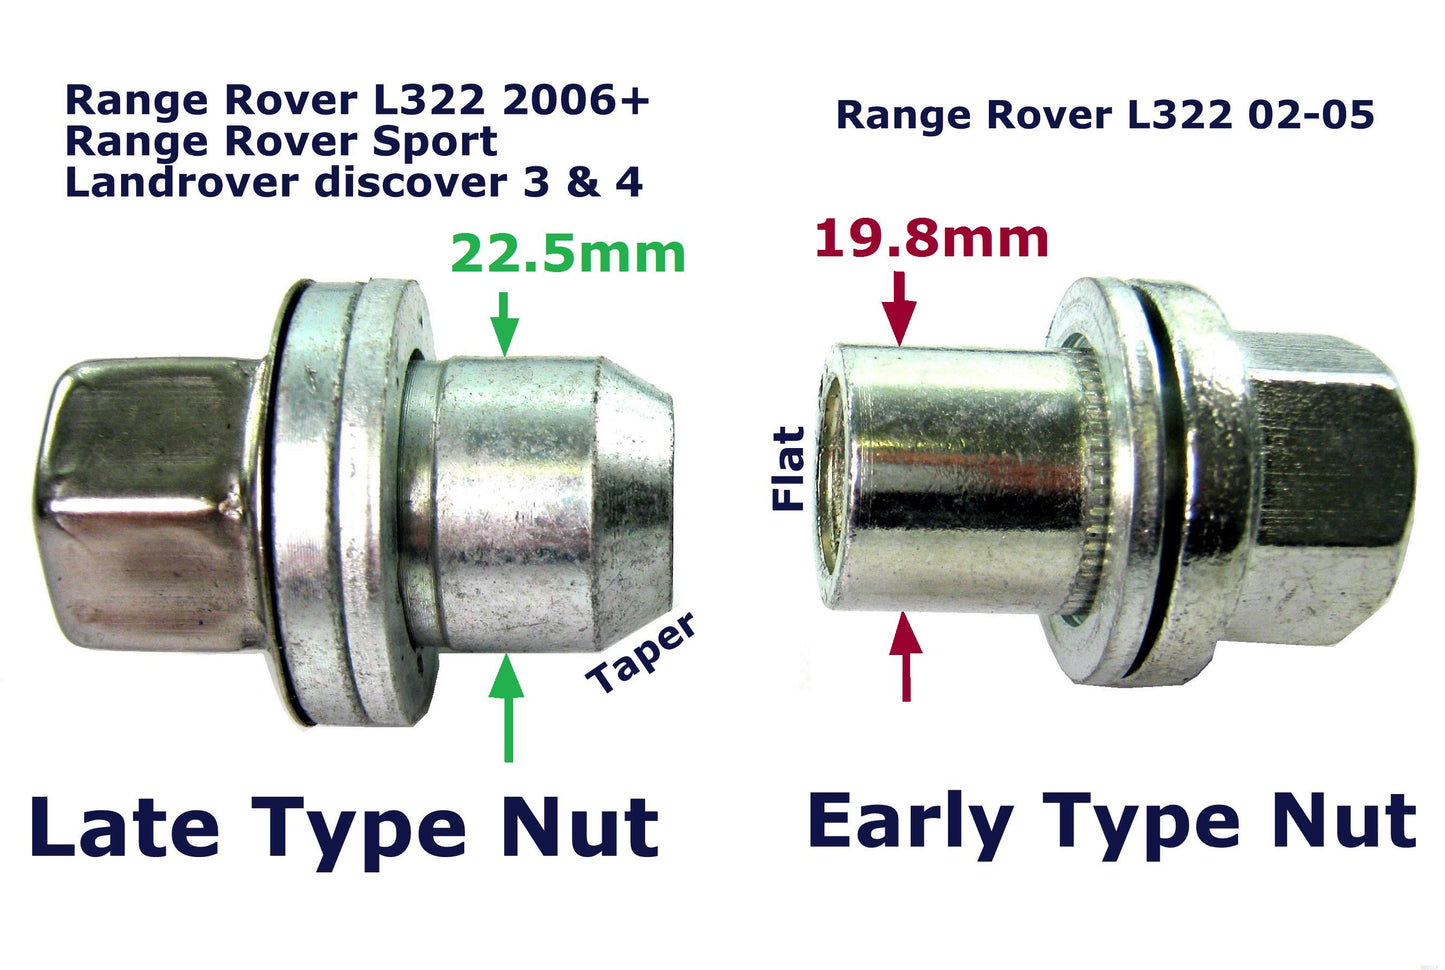 Single Wheel Nut to fit Range Rover L322